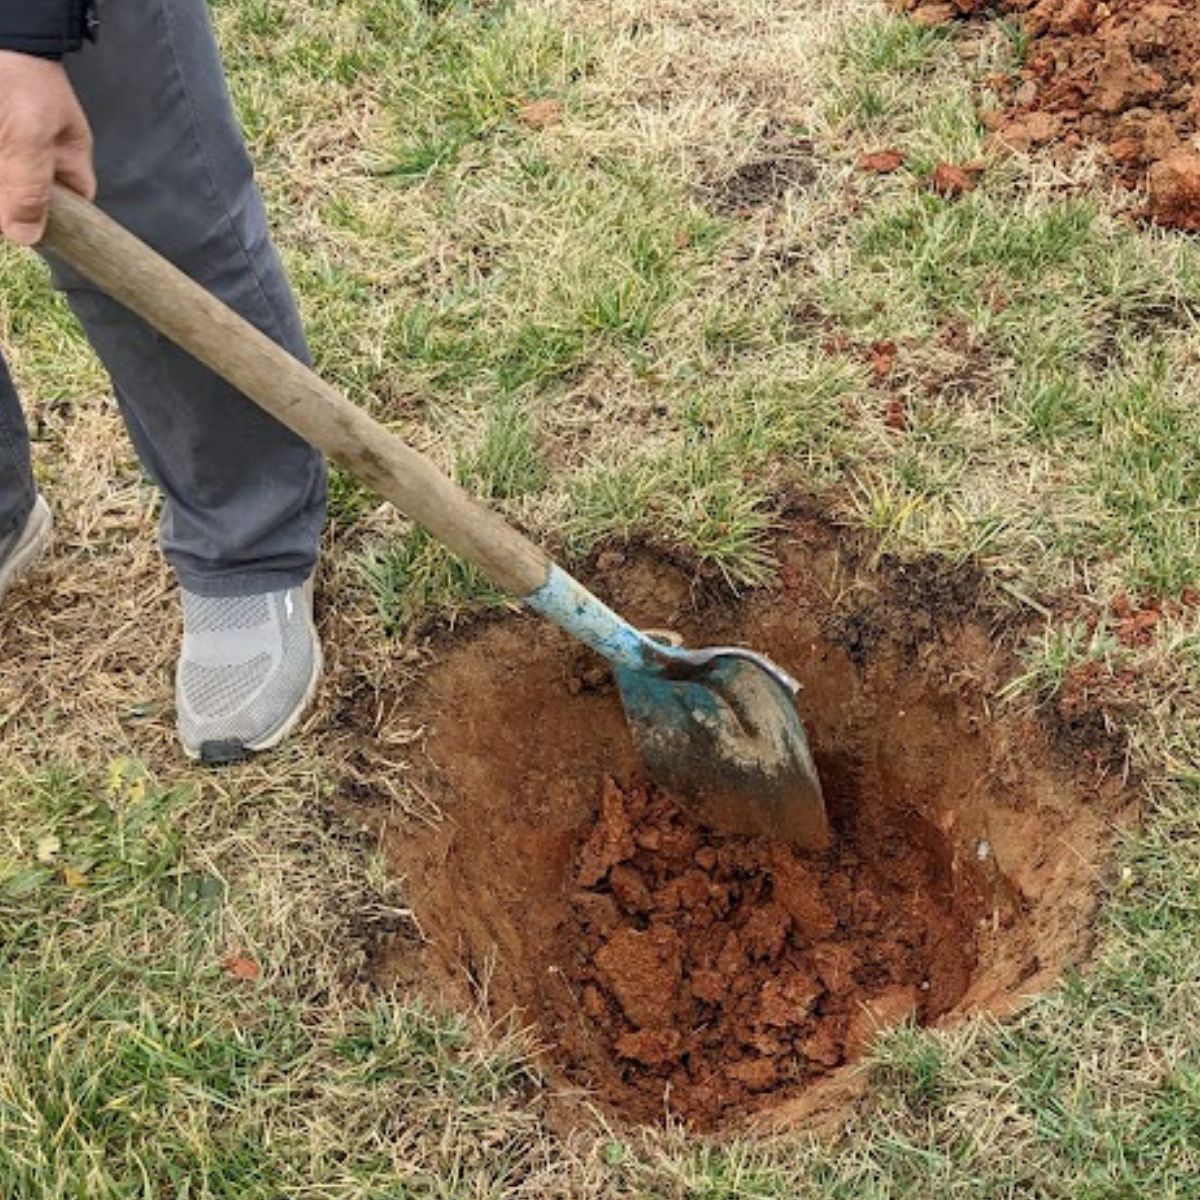 My husband digging a hole for planting a tree. 